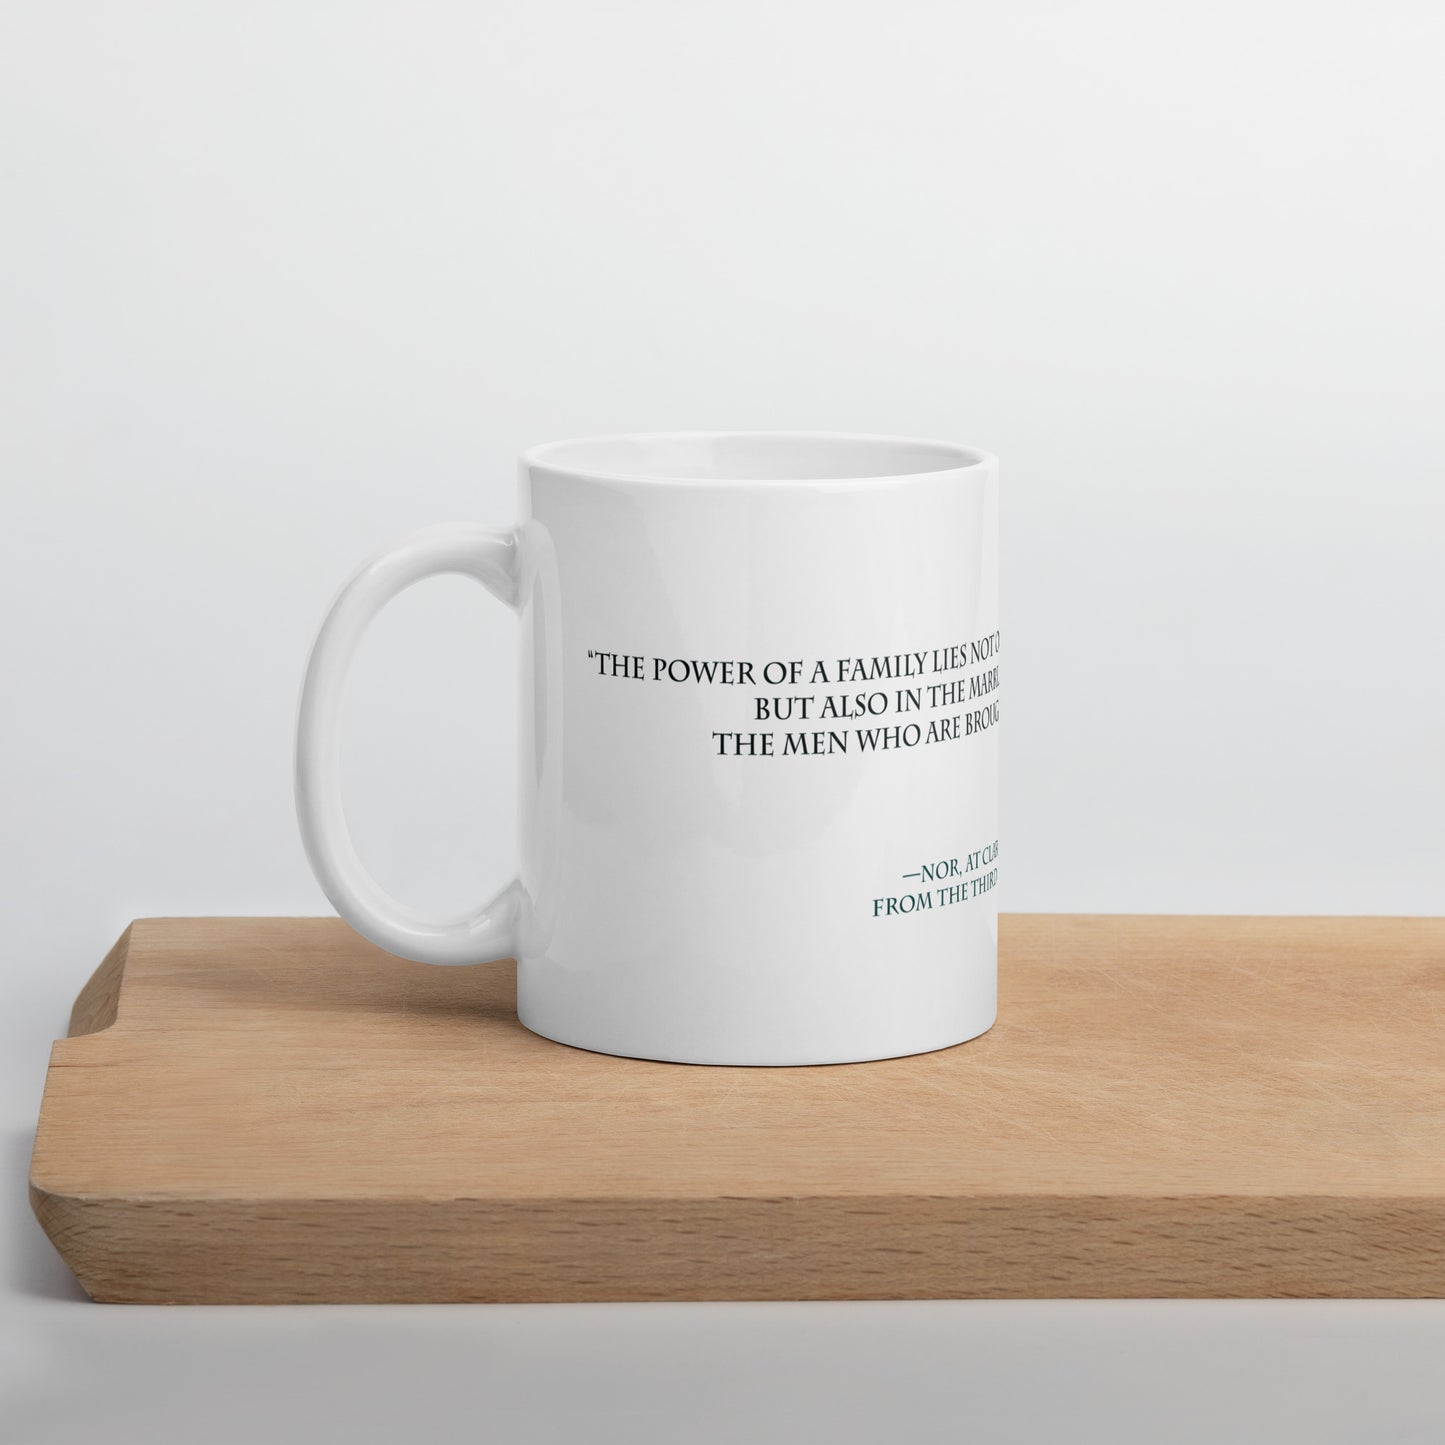 Nor's 'Power of a family' quote on mug